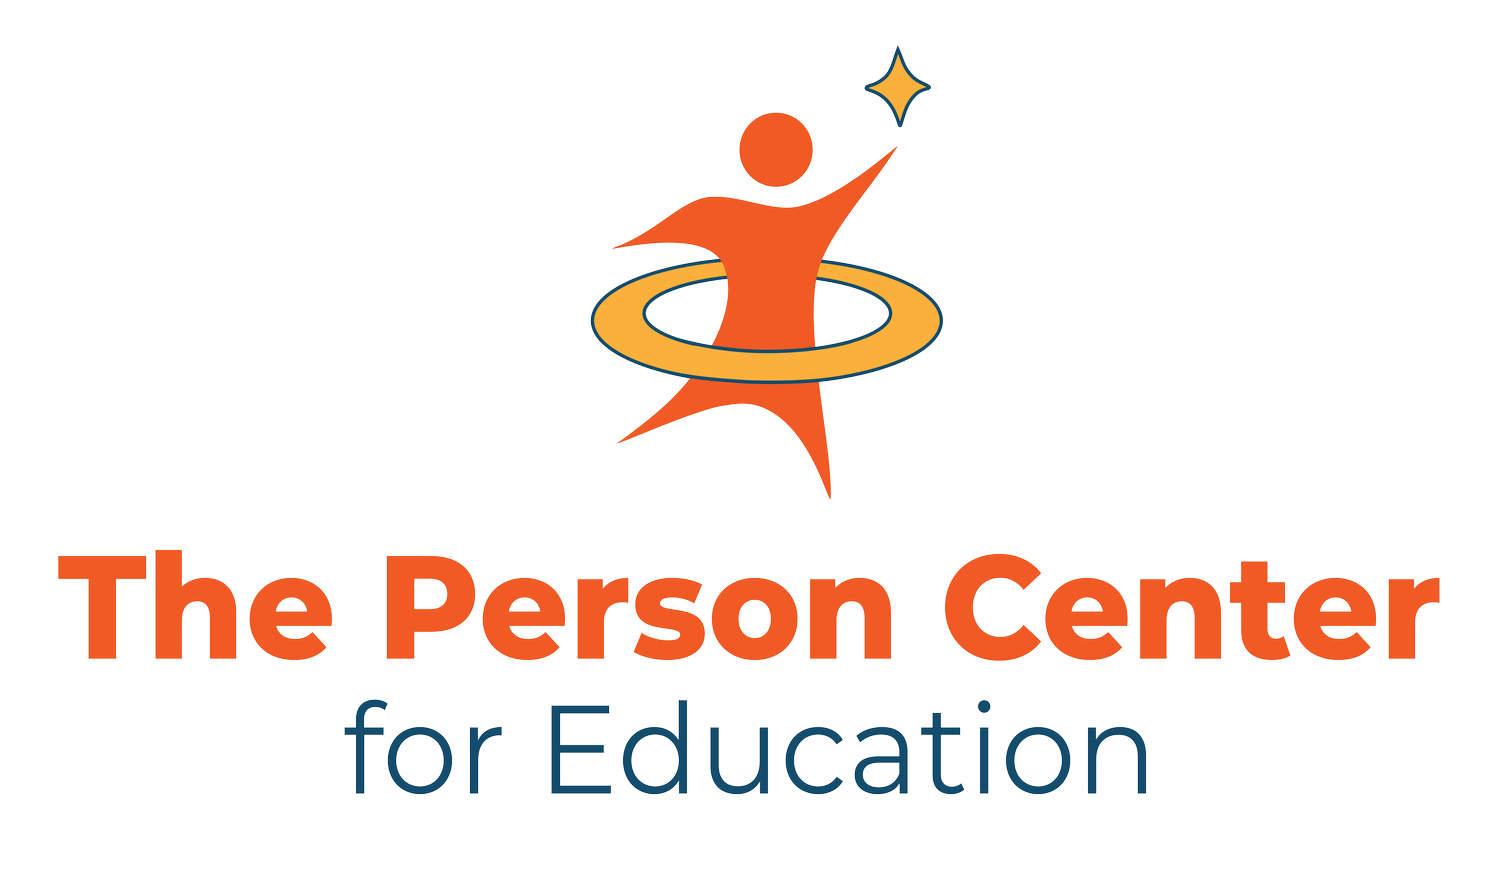 The Person Center for Education